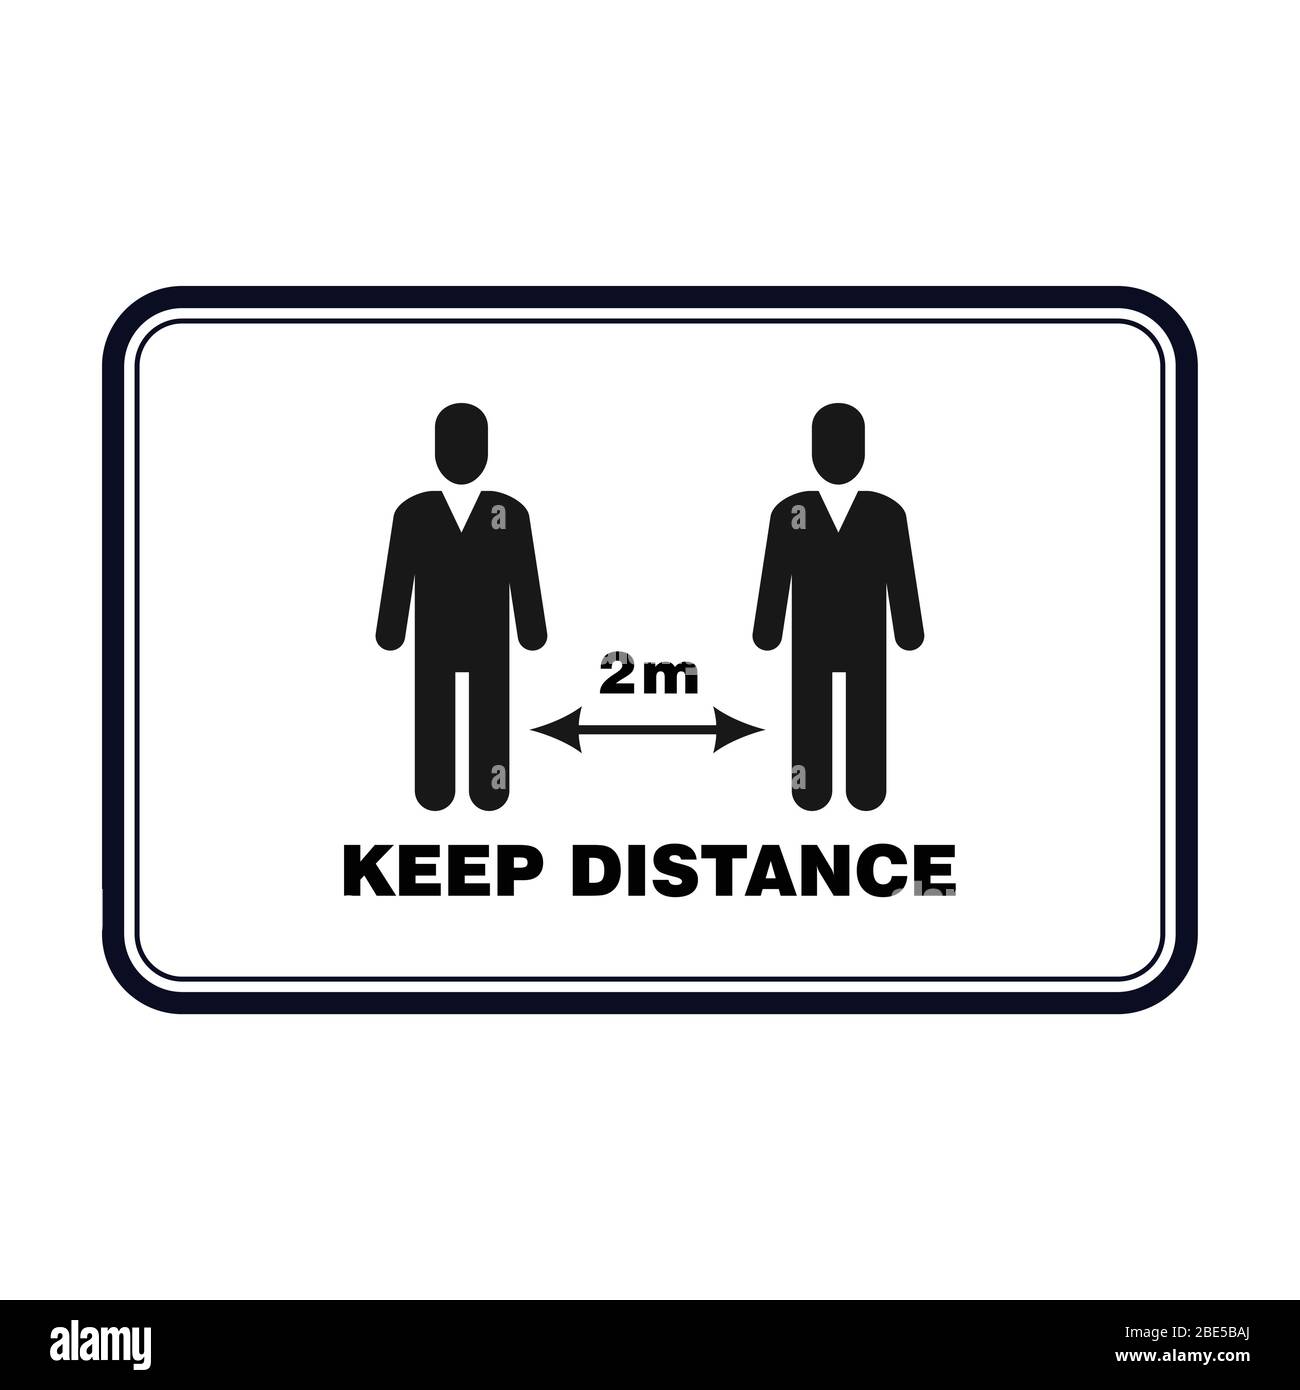 Keep distance sign, social distancing banner to avoid contamination of virus Stock Vector